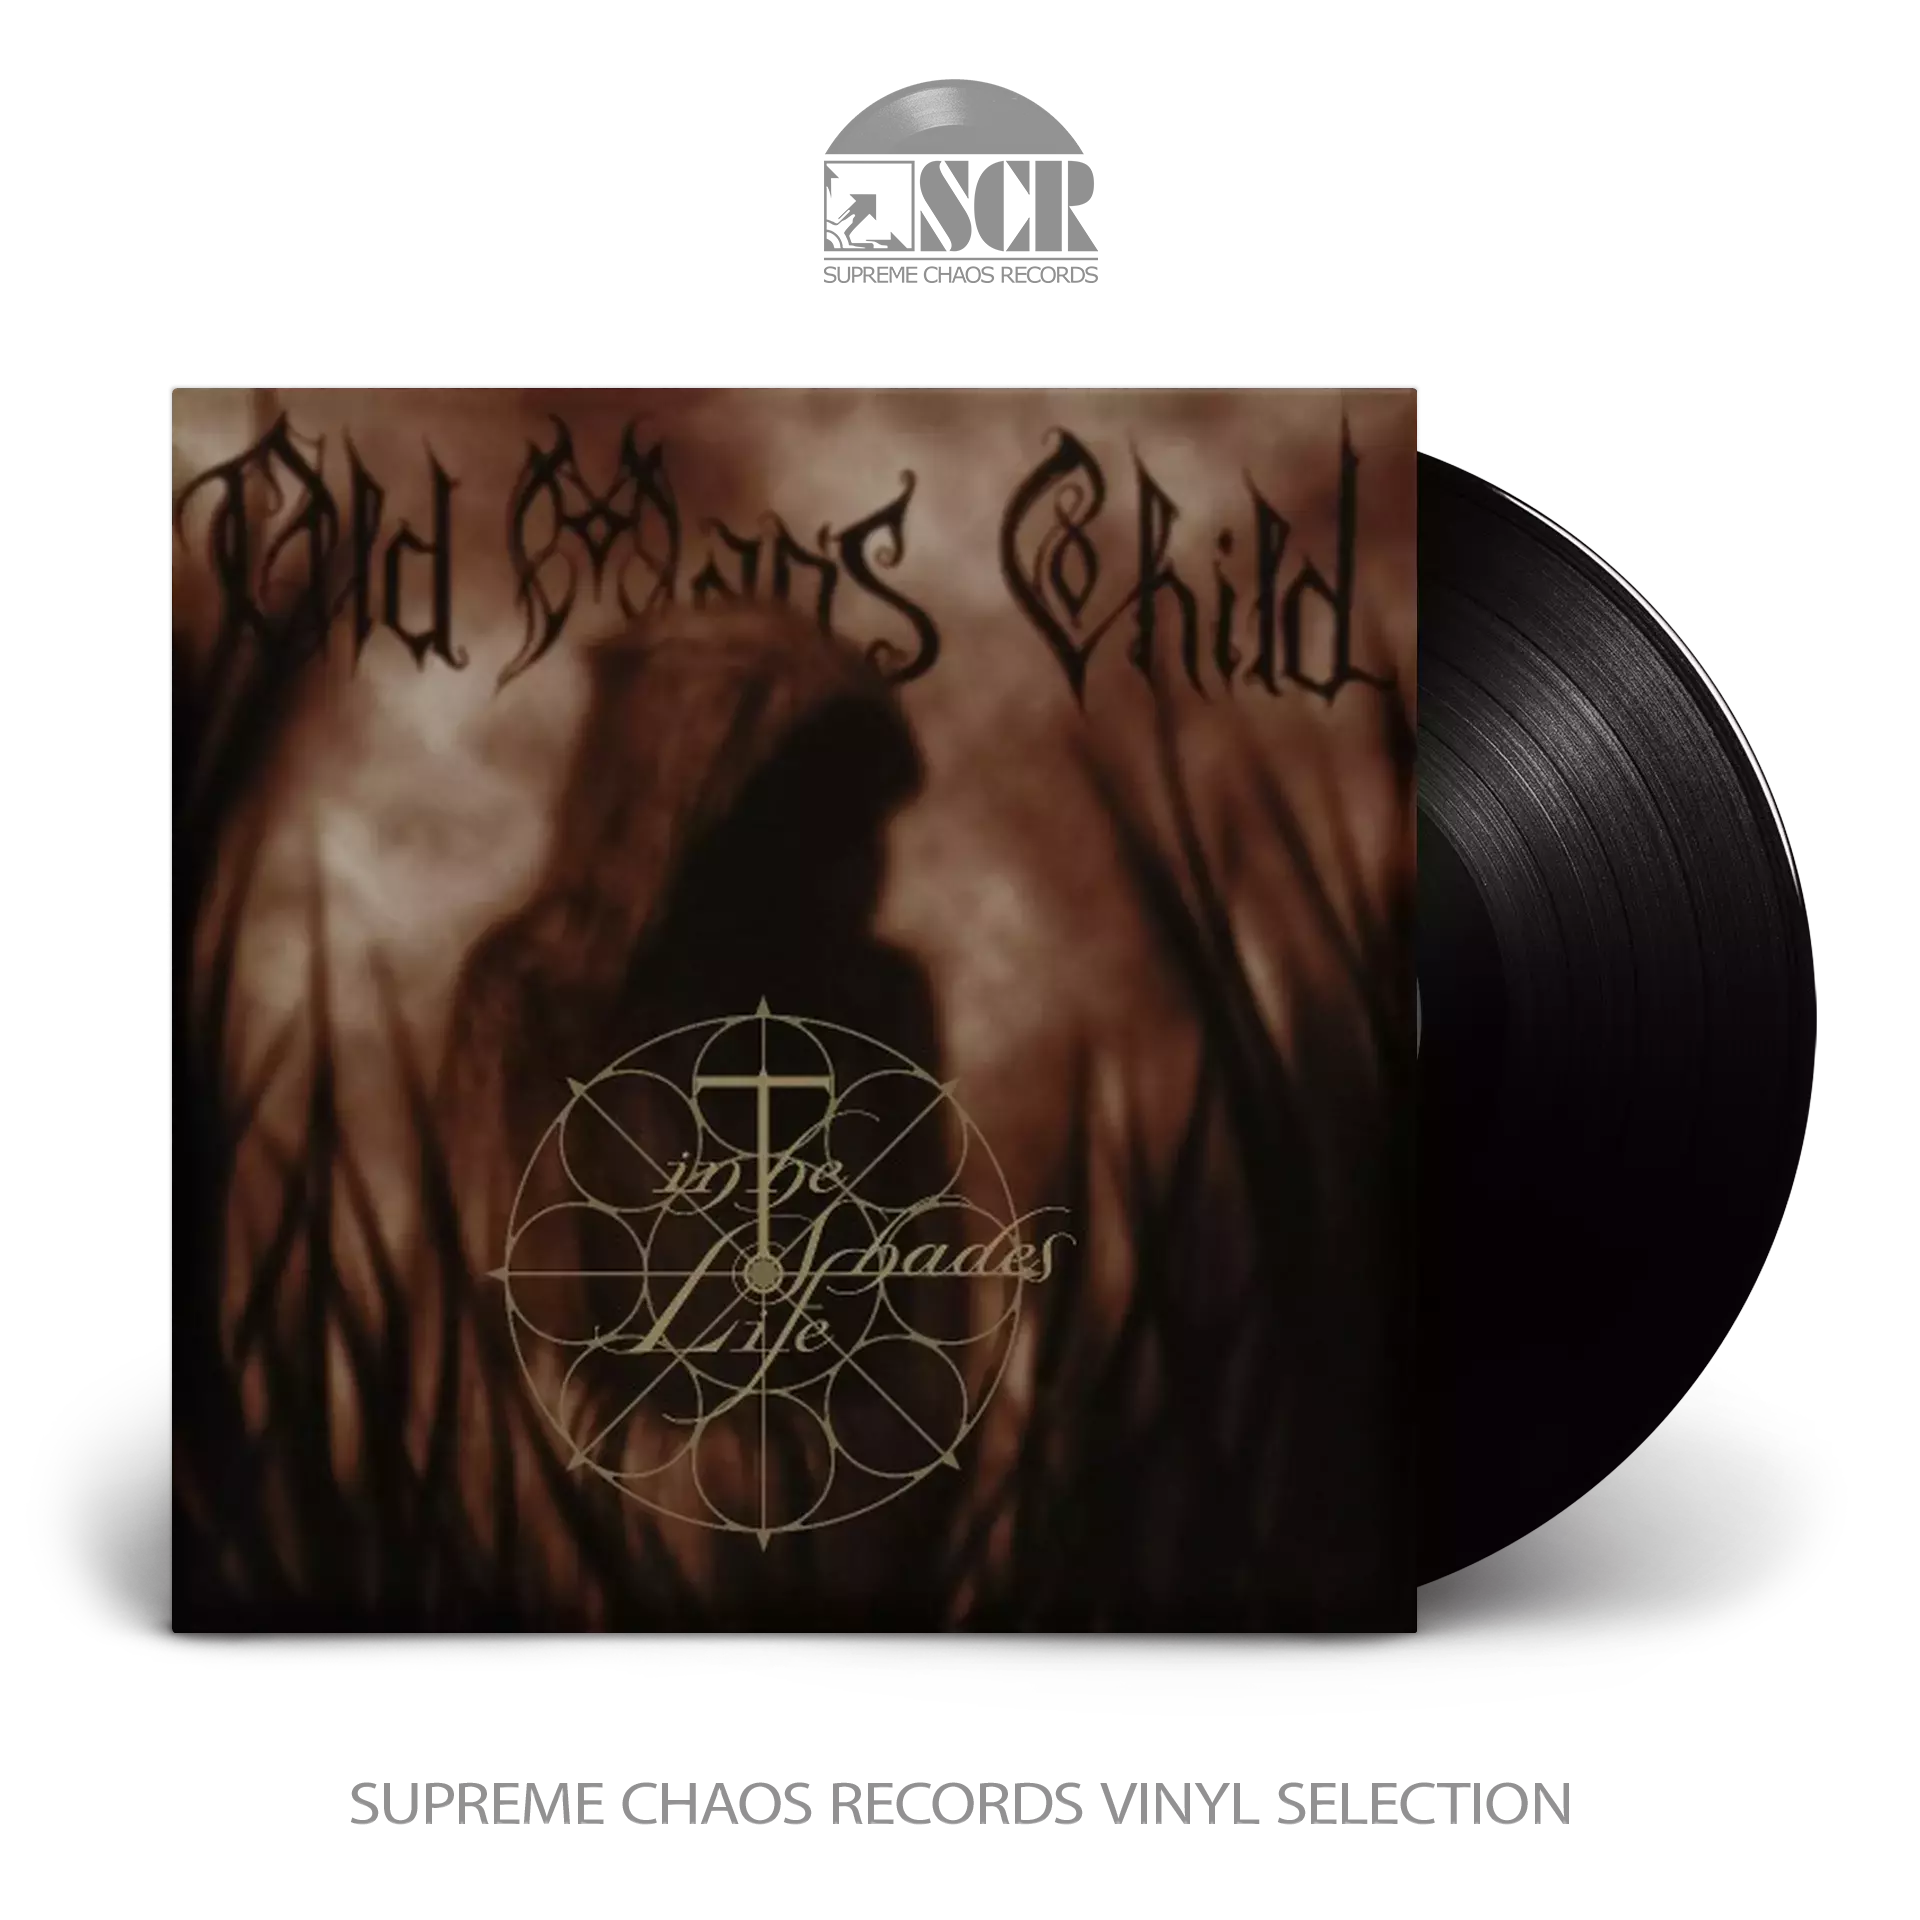 OLD MAN'S CHILD - In The Shades Of Life [BLACK LP]